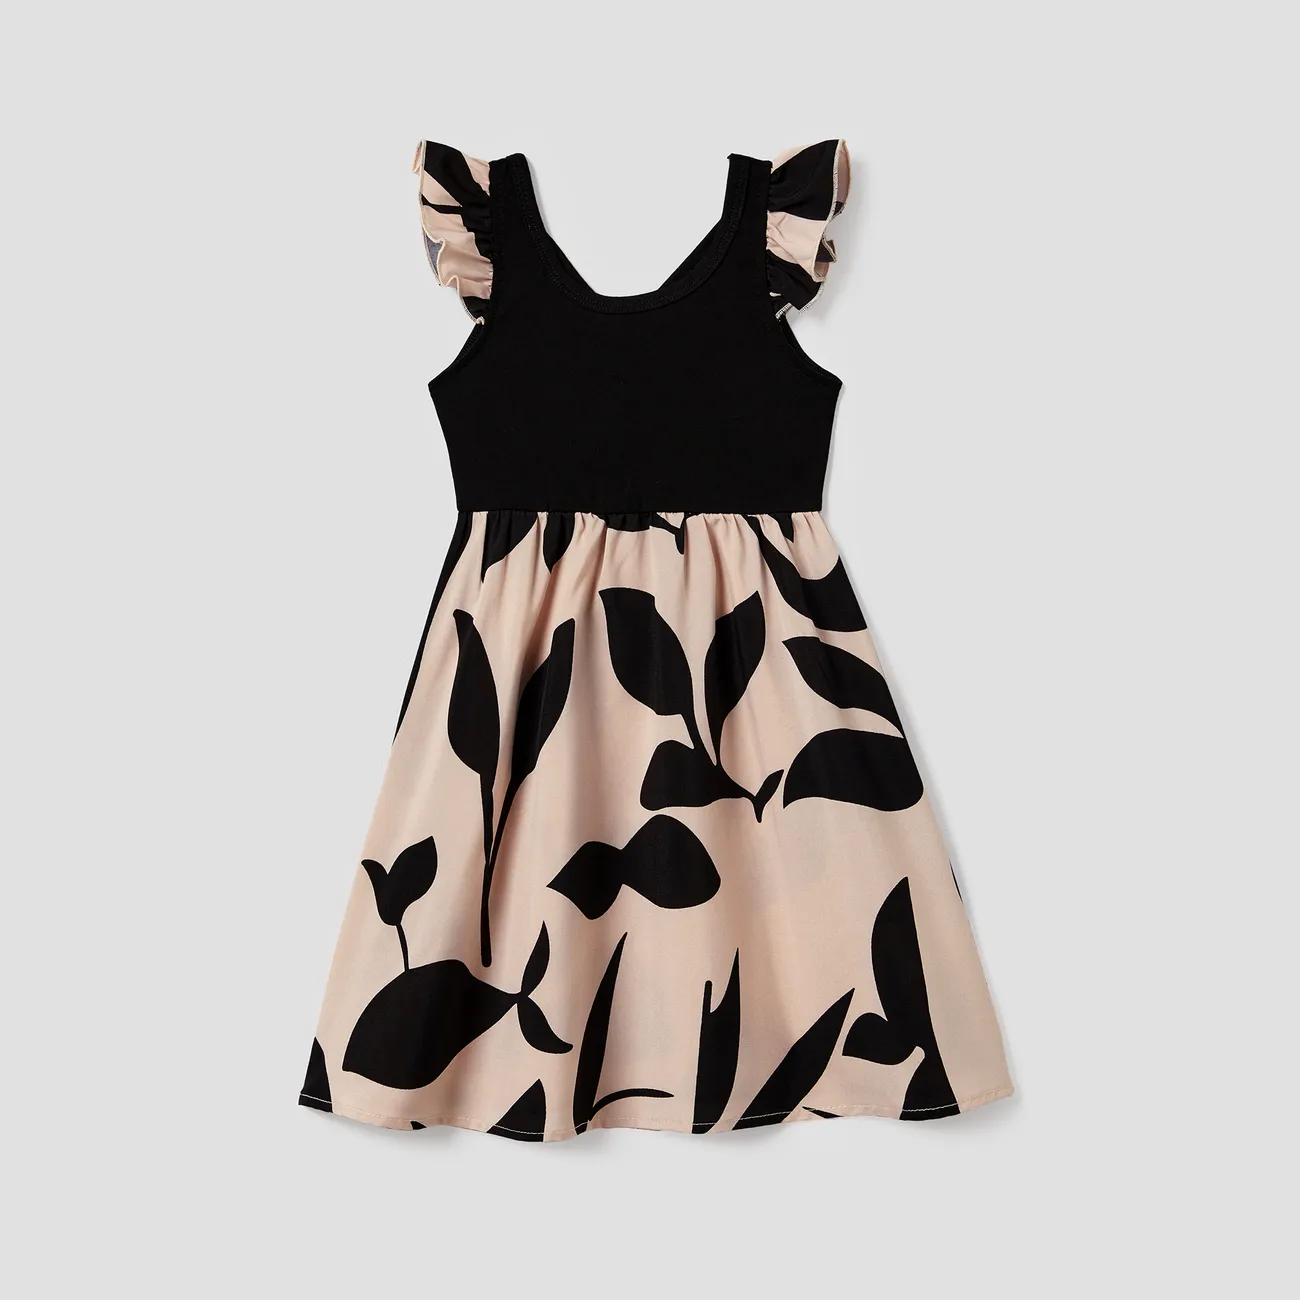 Family Matching Cross Back Floral Strap Dress and Colorblock Top Sets Black big image 1